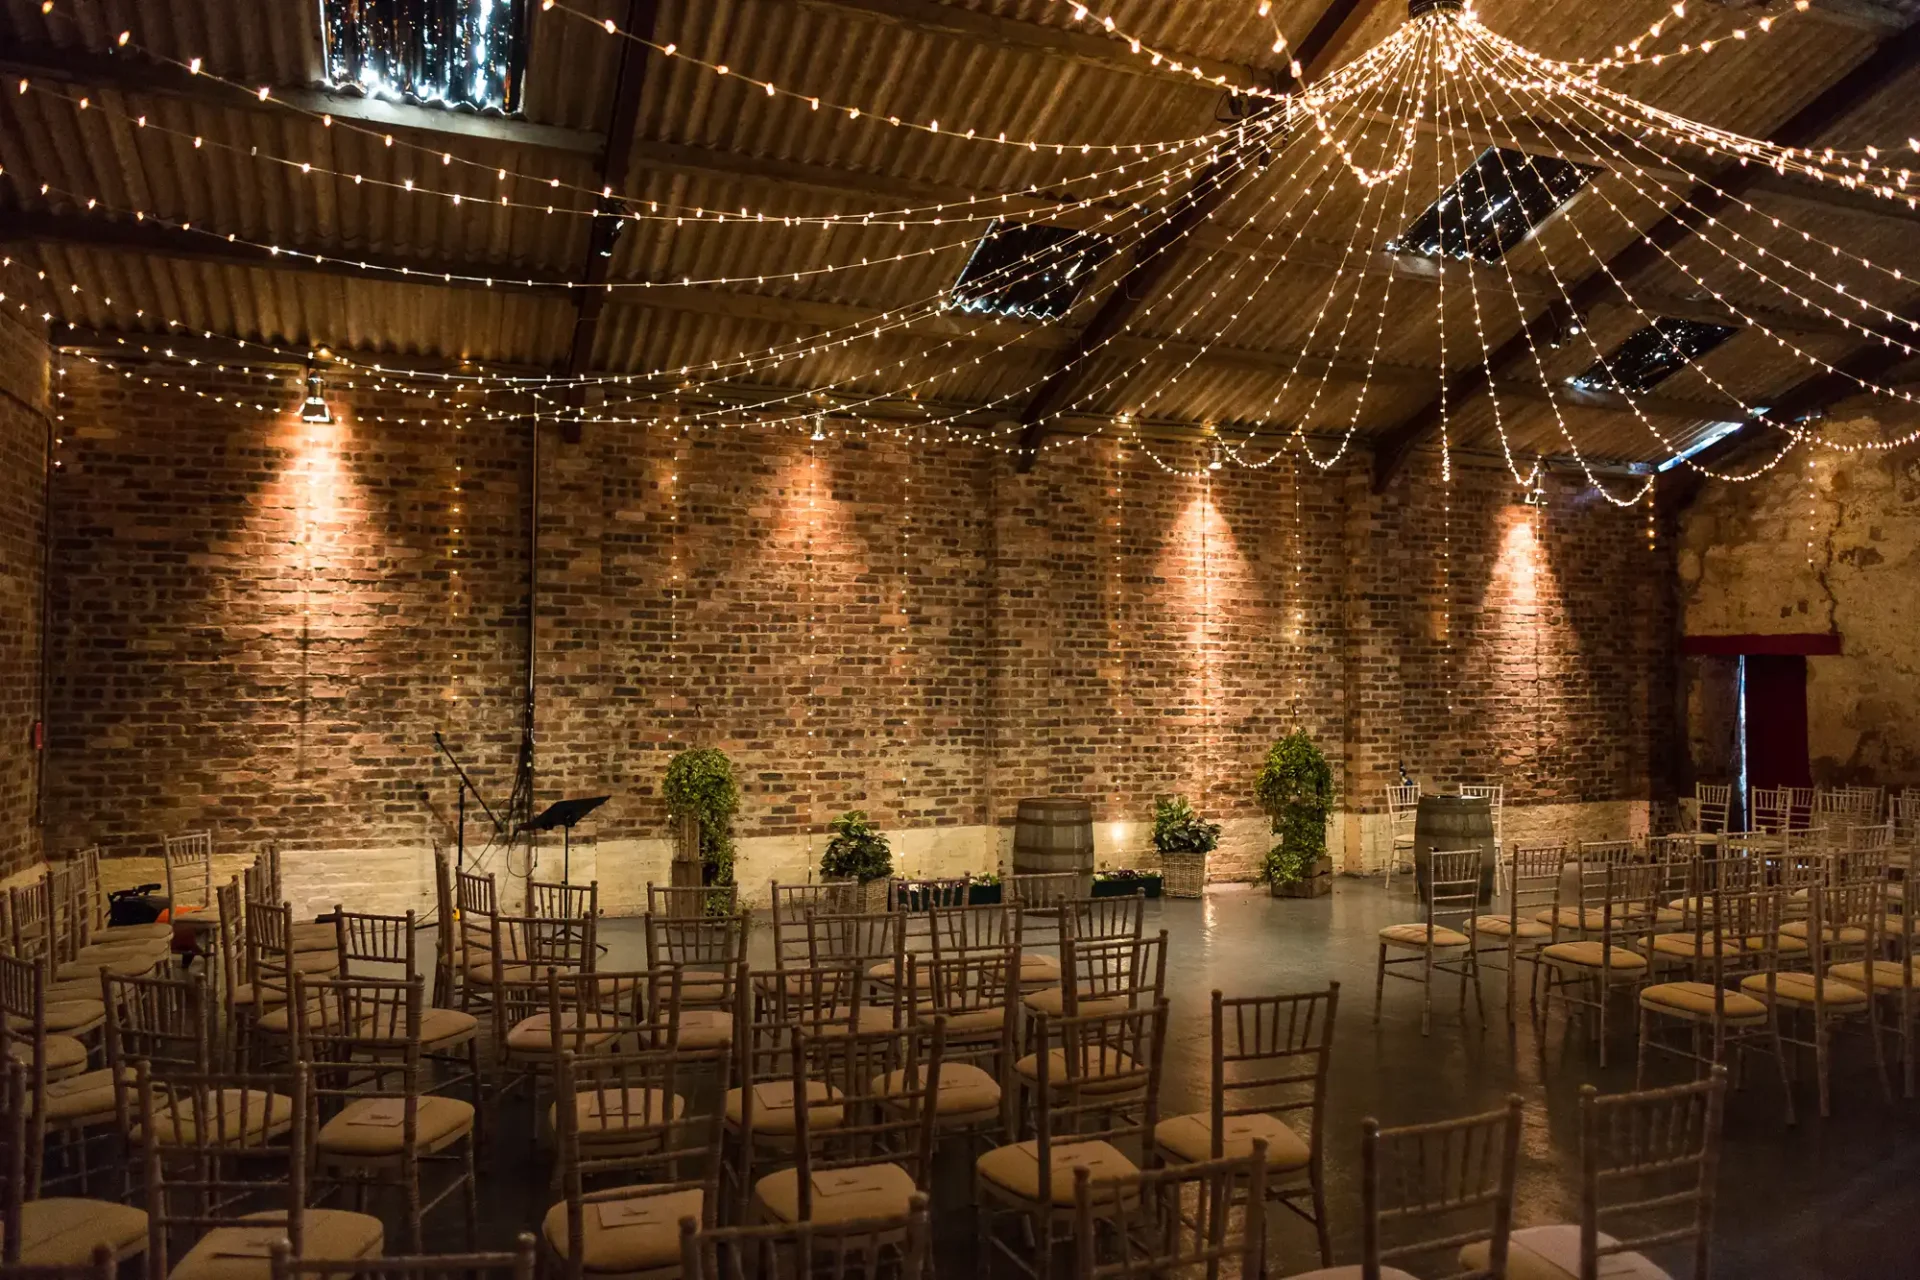 Rustic indoor venue with brick walls and wooden beams, adorned with string lights and set up with rows of chairs for an event.